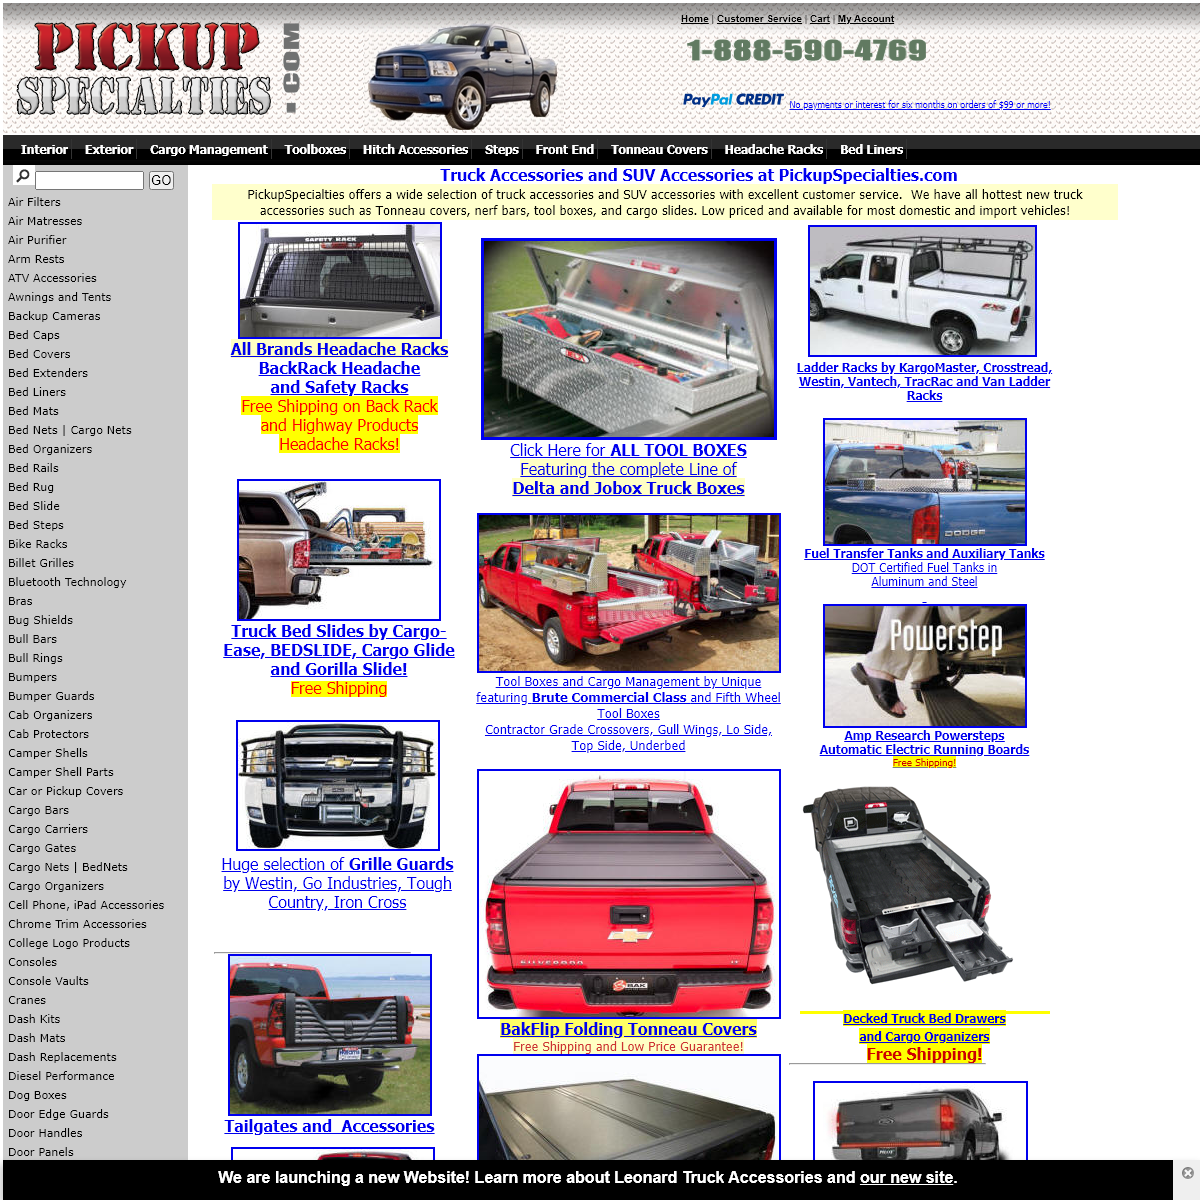 A complete backup of pickupspecialties.com